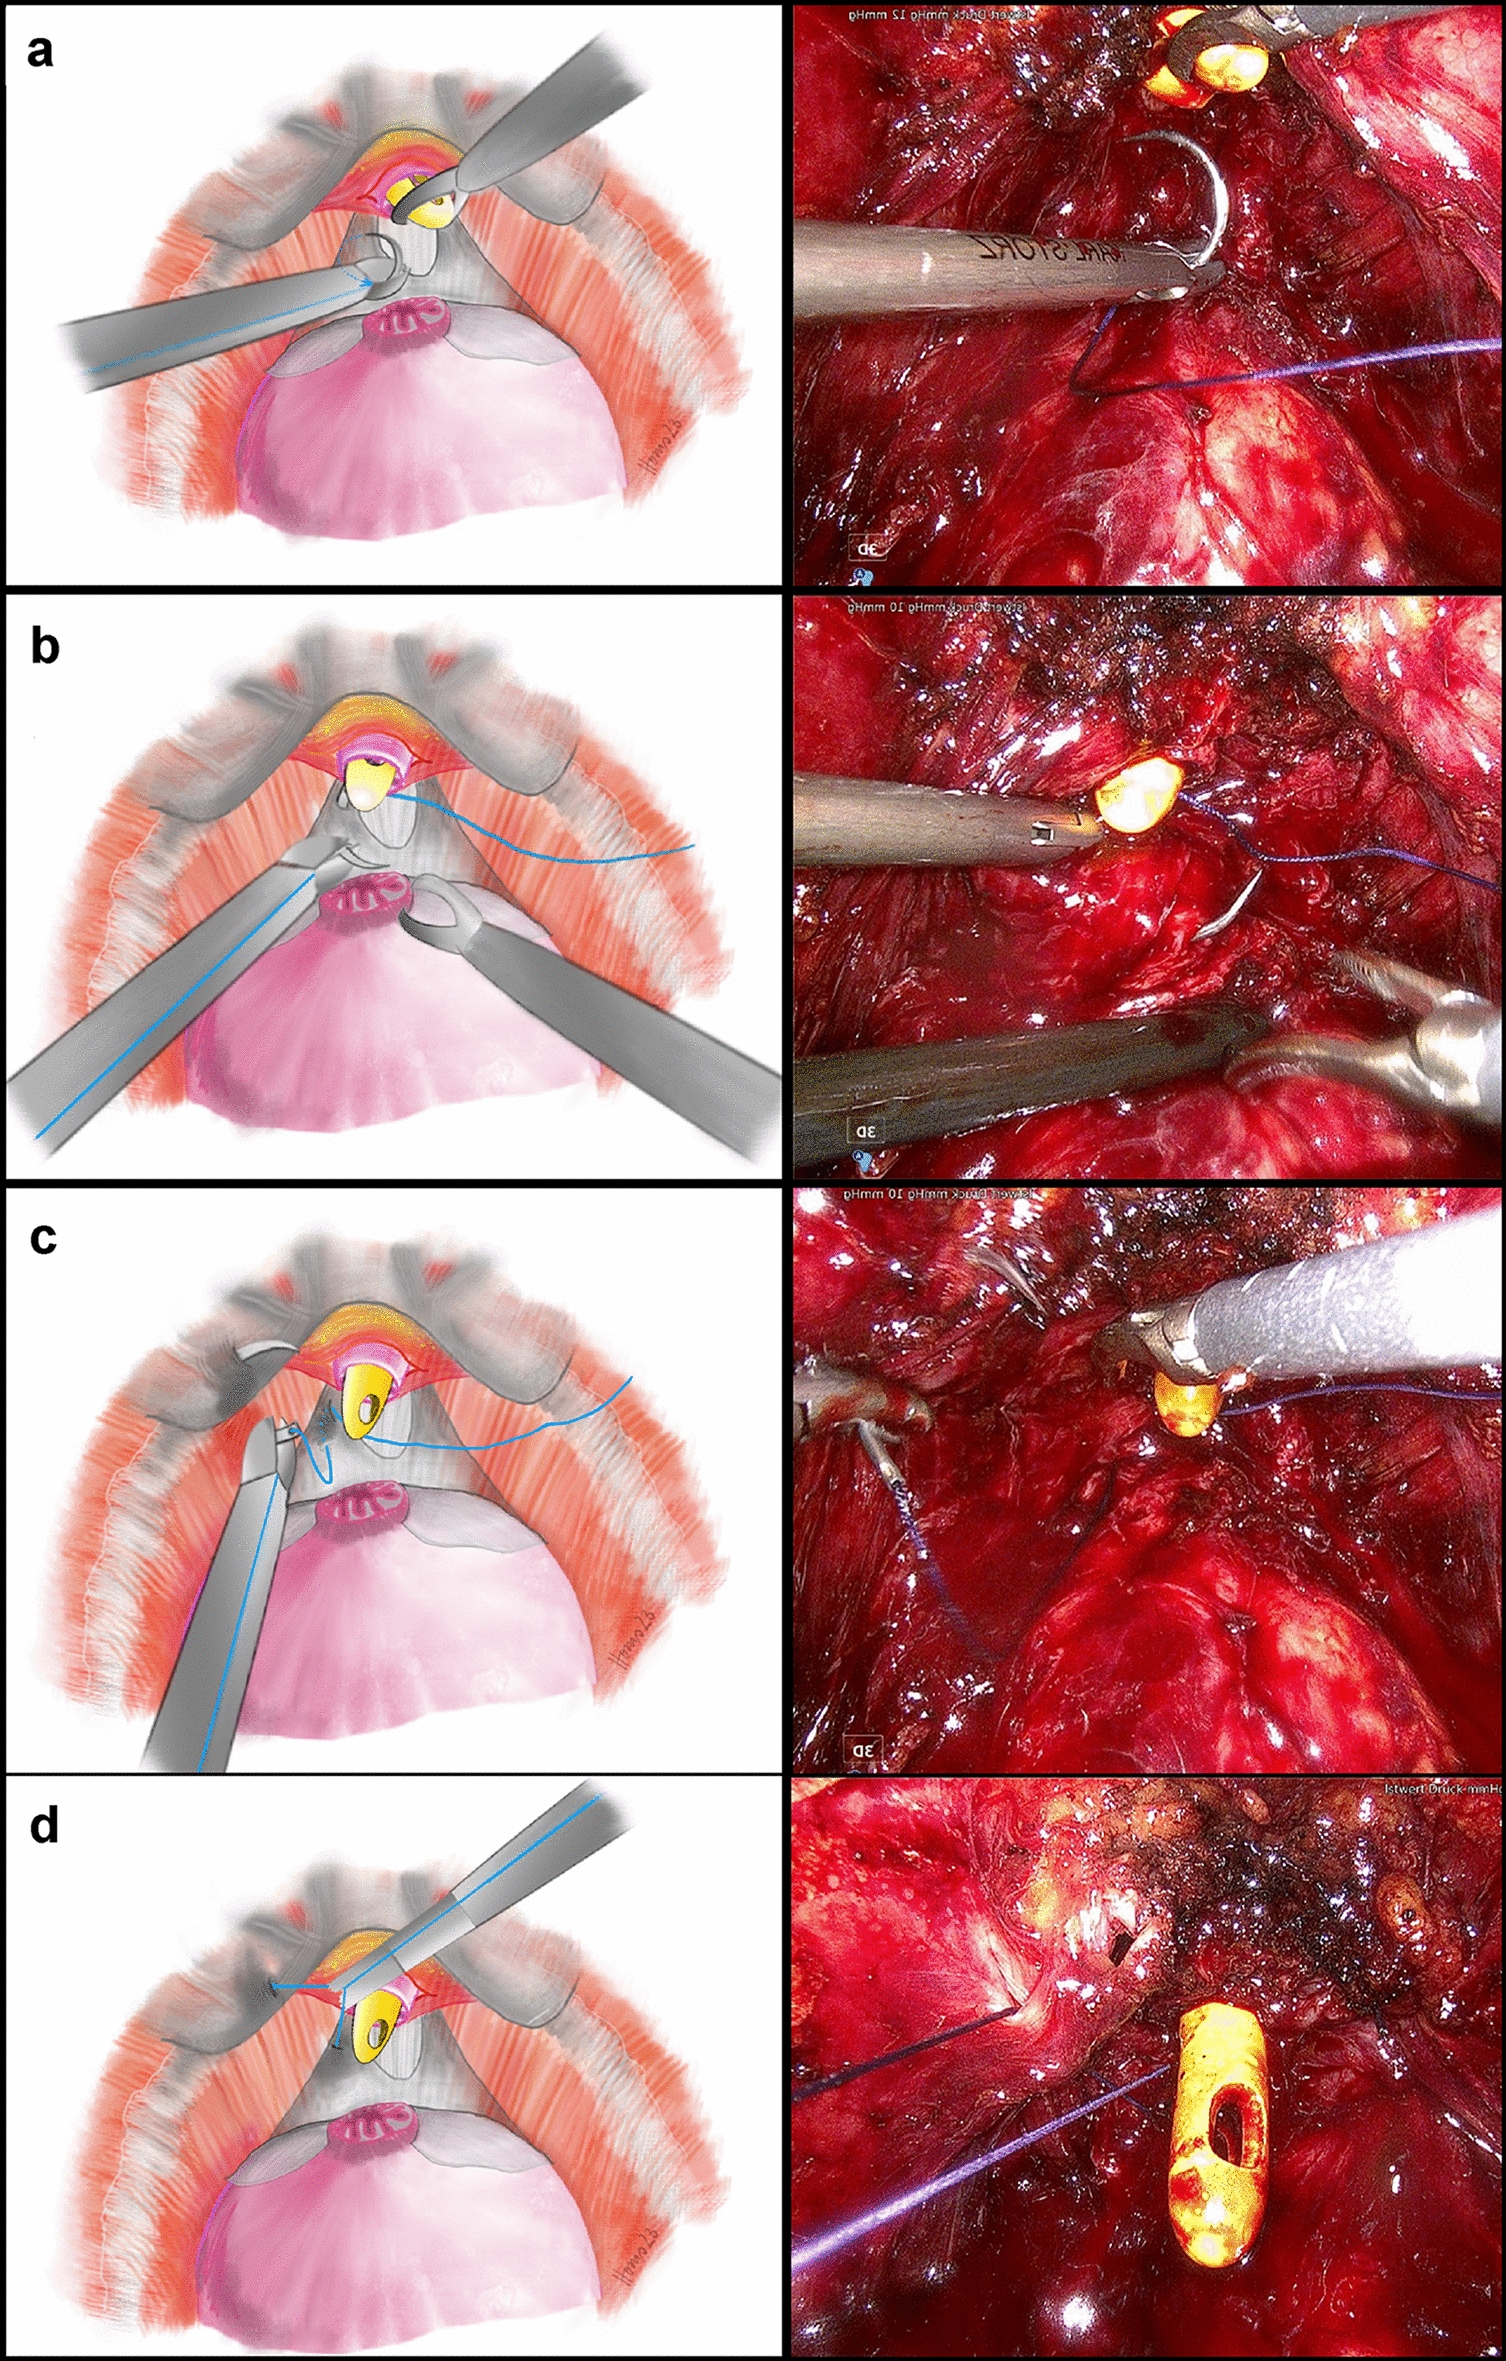 Improved early continence following laparoscopic radical prostatectomy: the urethral hammock technique